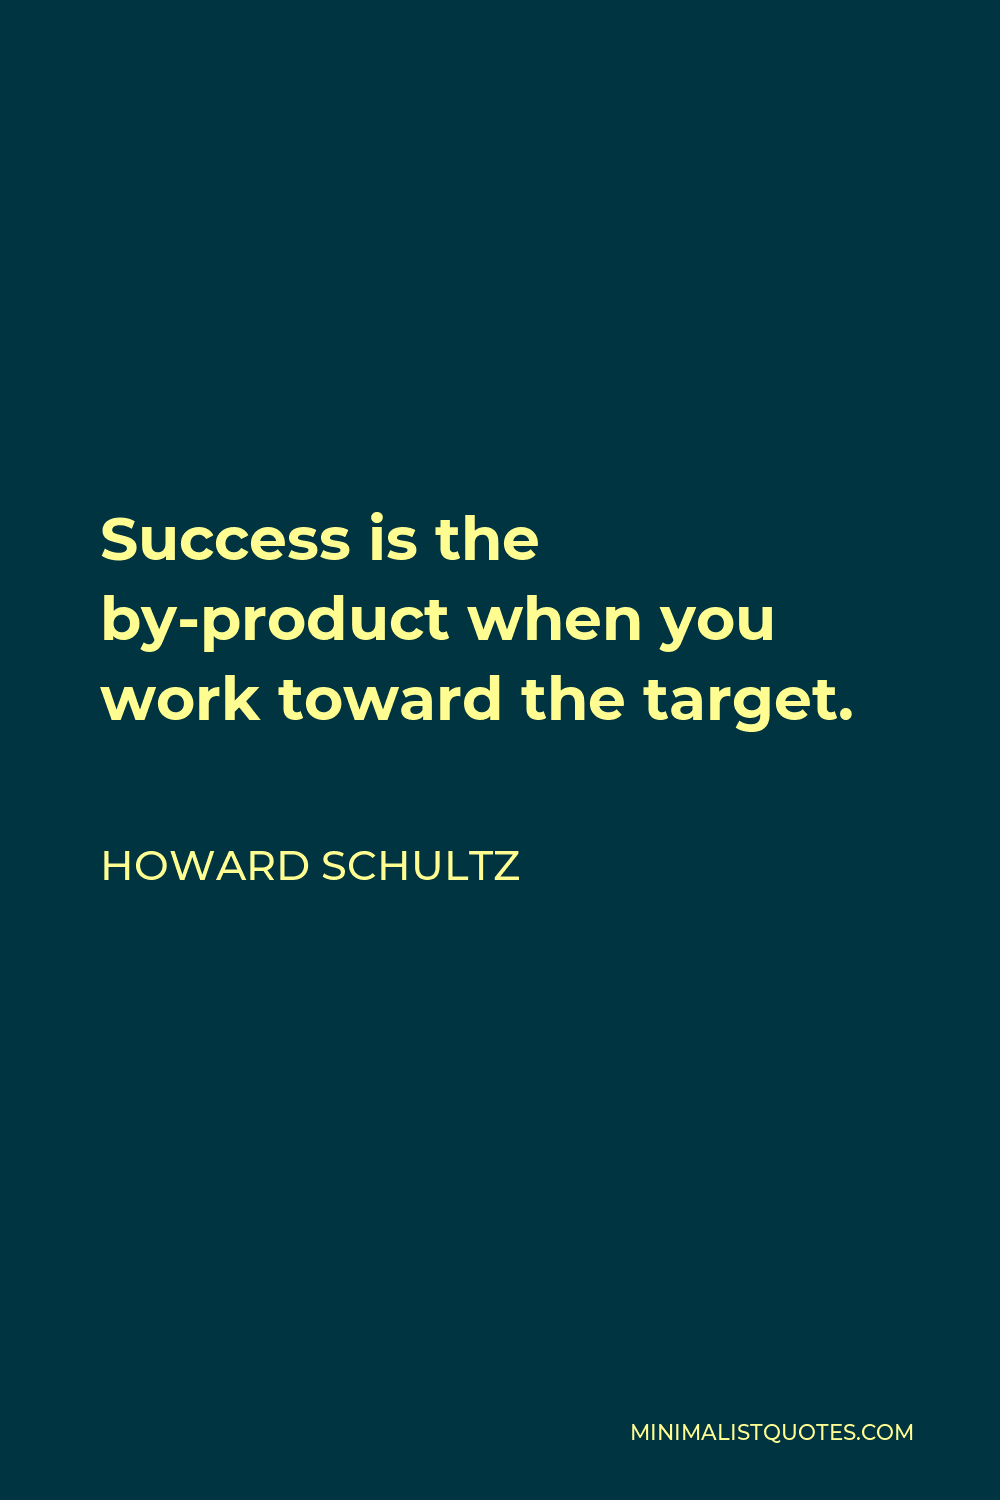 Howard Schultz Quote - Success is the by-product when you work toward the target.